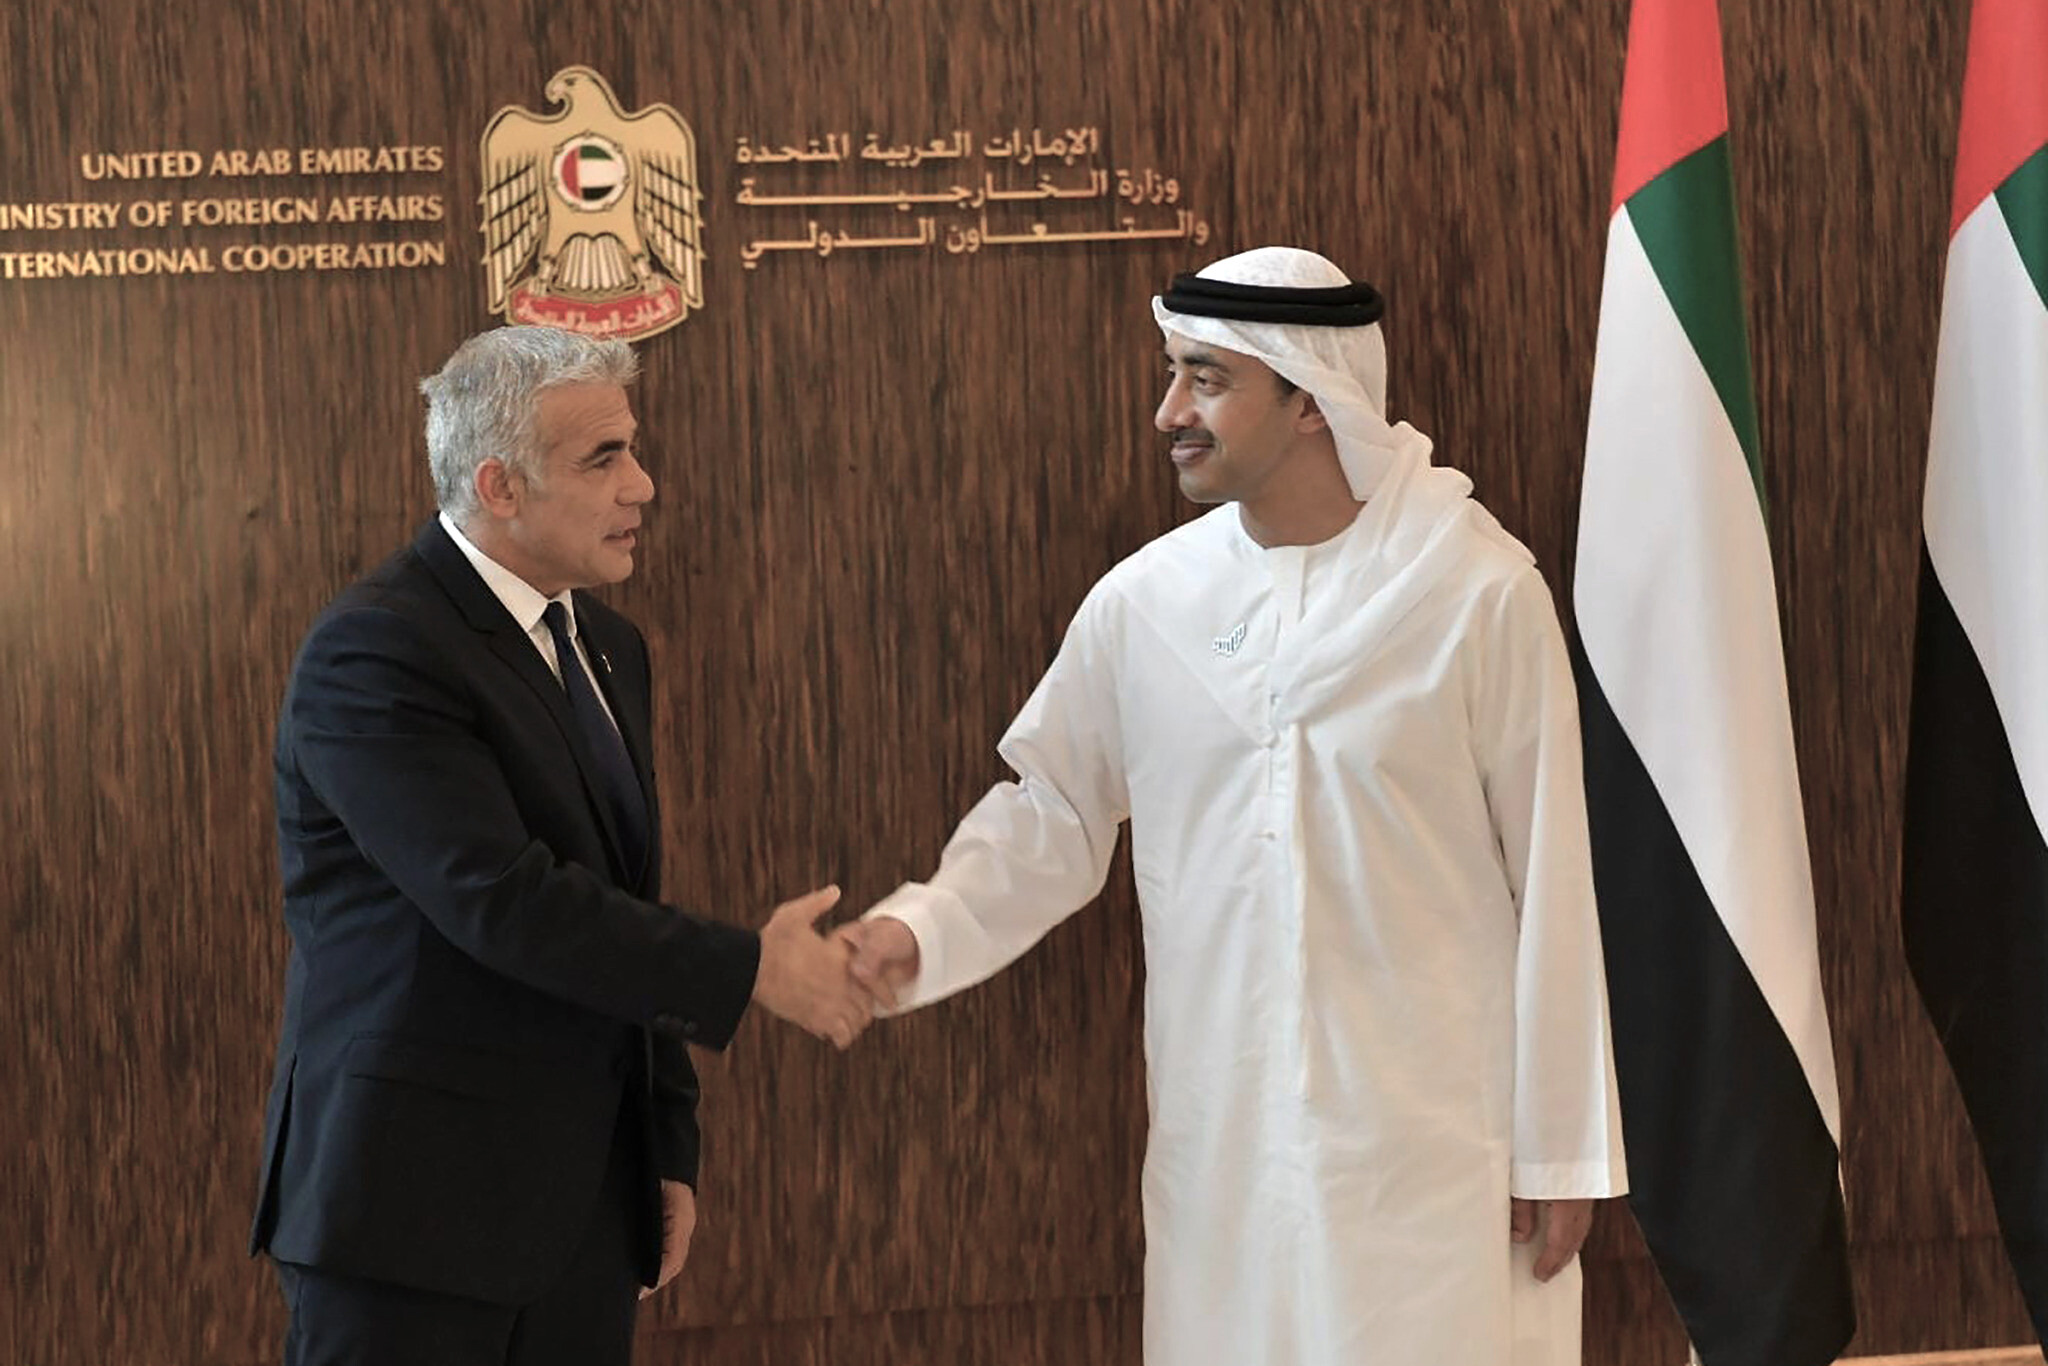 Emirati Foreign Minister Sheikh Abdullah bin Zayed Al Nahyan met with Israeli Prime Minister Yair Lapid in Jerusalem to discuss further expanding bilateral cooperation and engagement in multilateral fora.